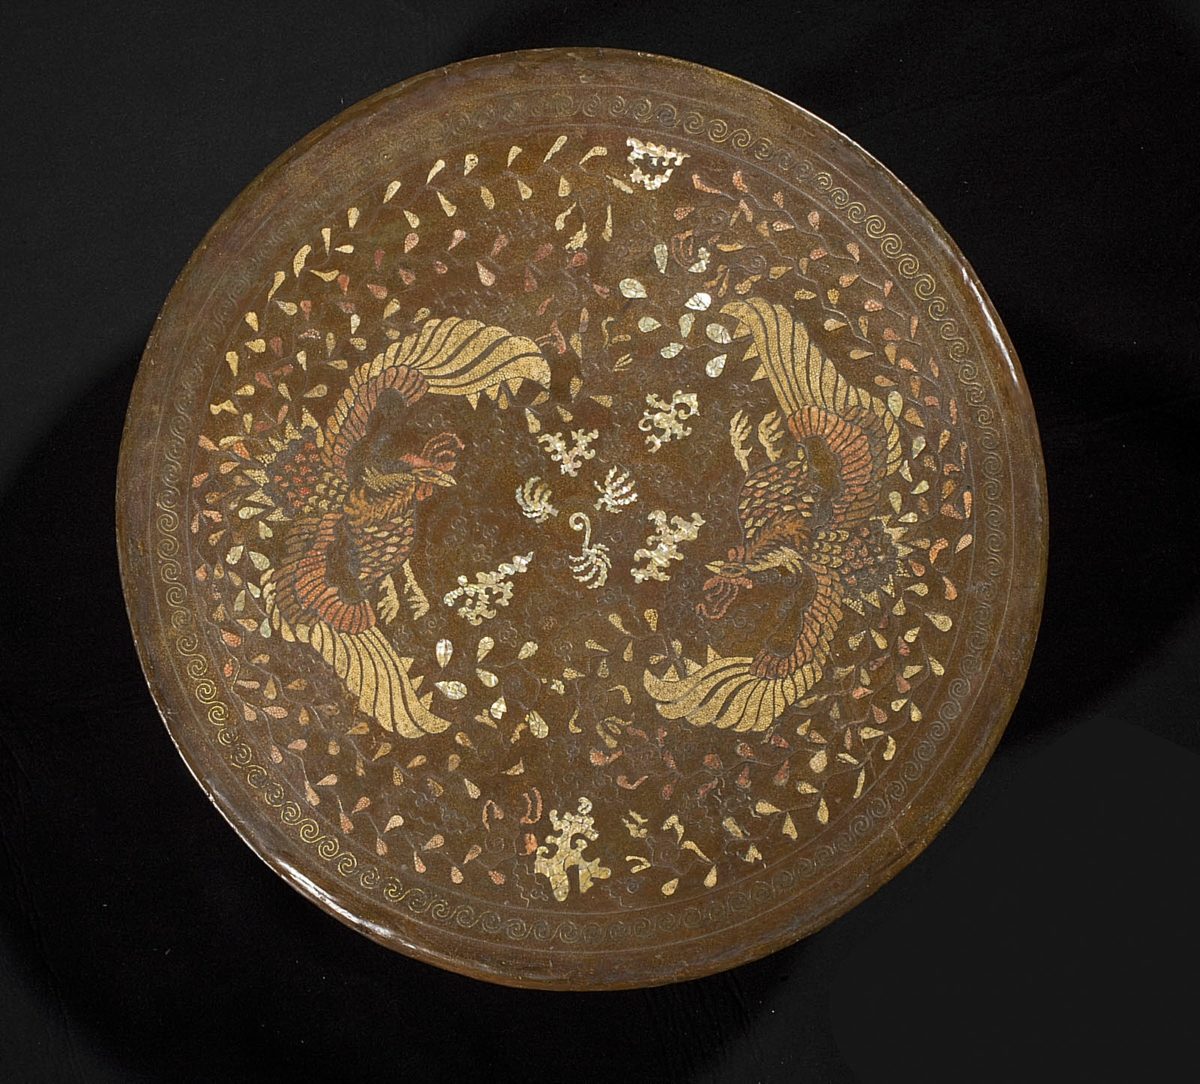 Top view of a Korean lacquer table showing two phoenixes